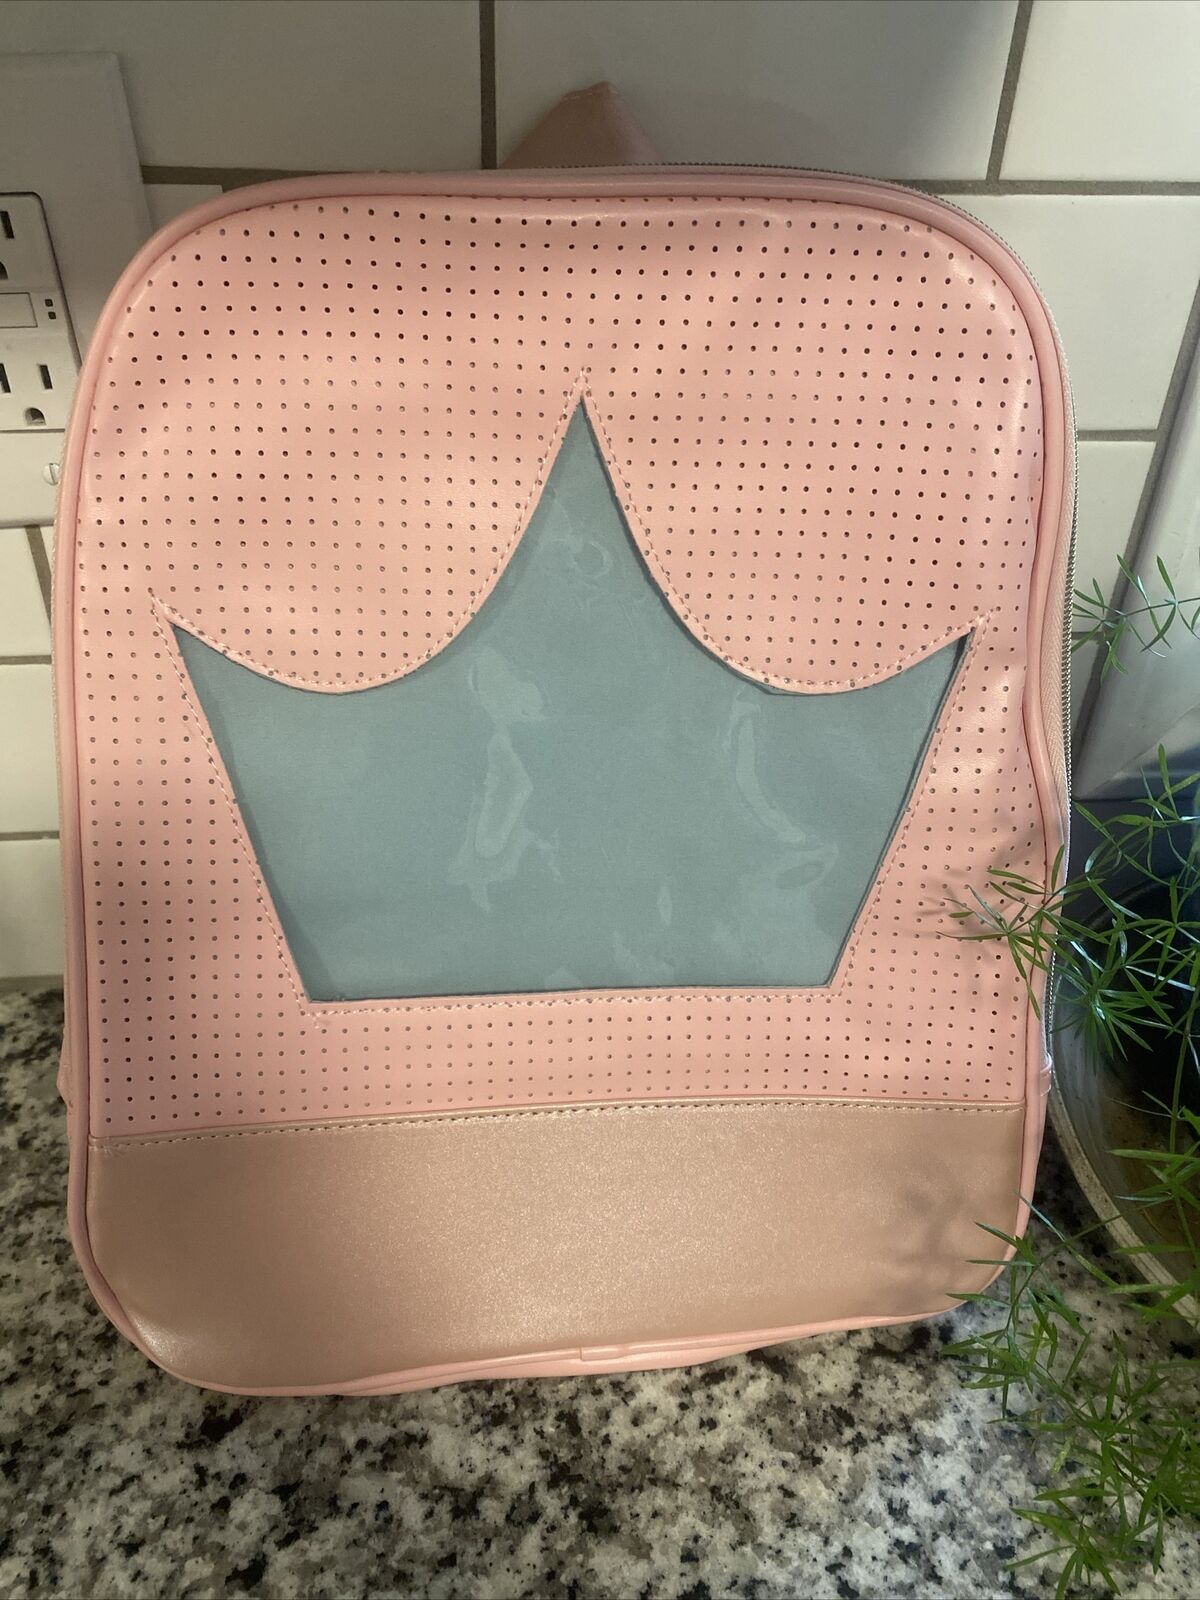 Disney Park Princess Crown Simulated Leather Backpack Pin Trader Holder NWT New